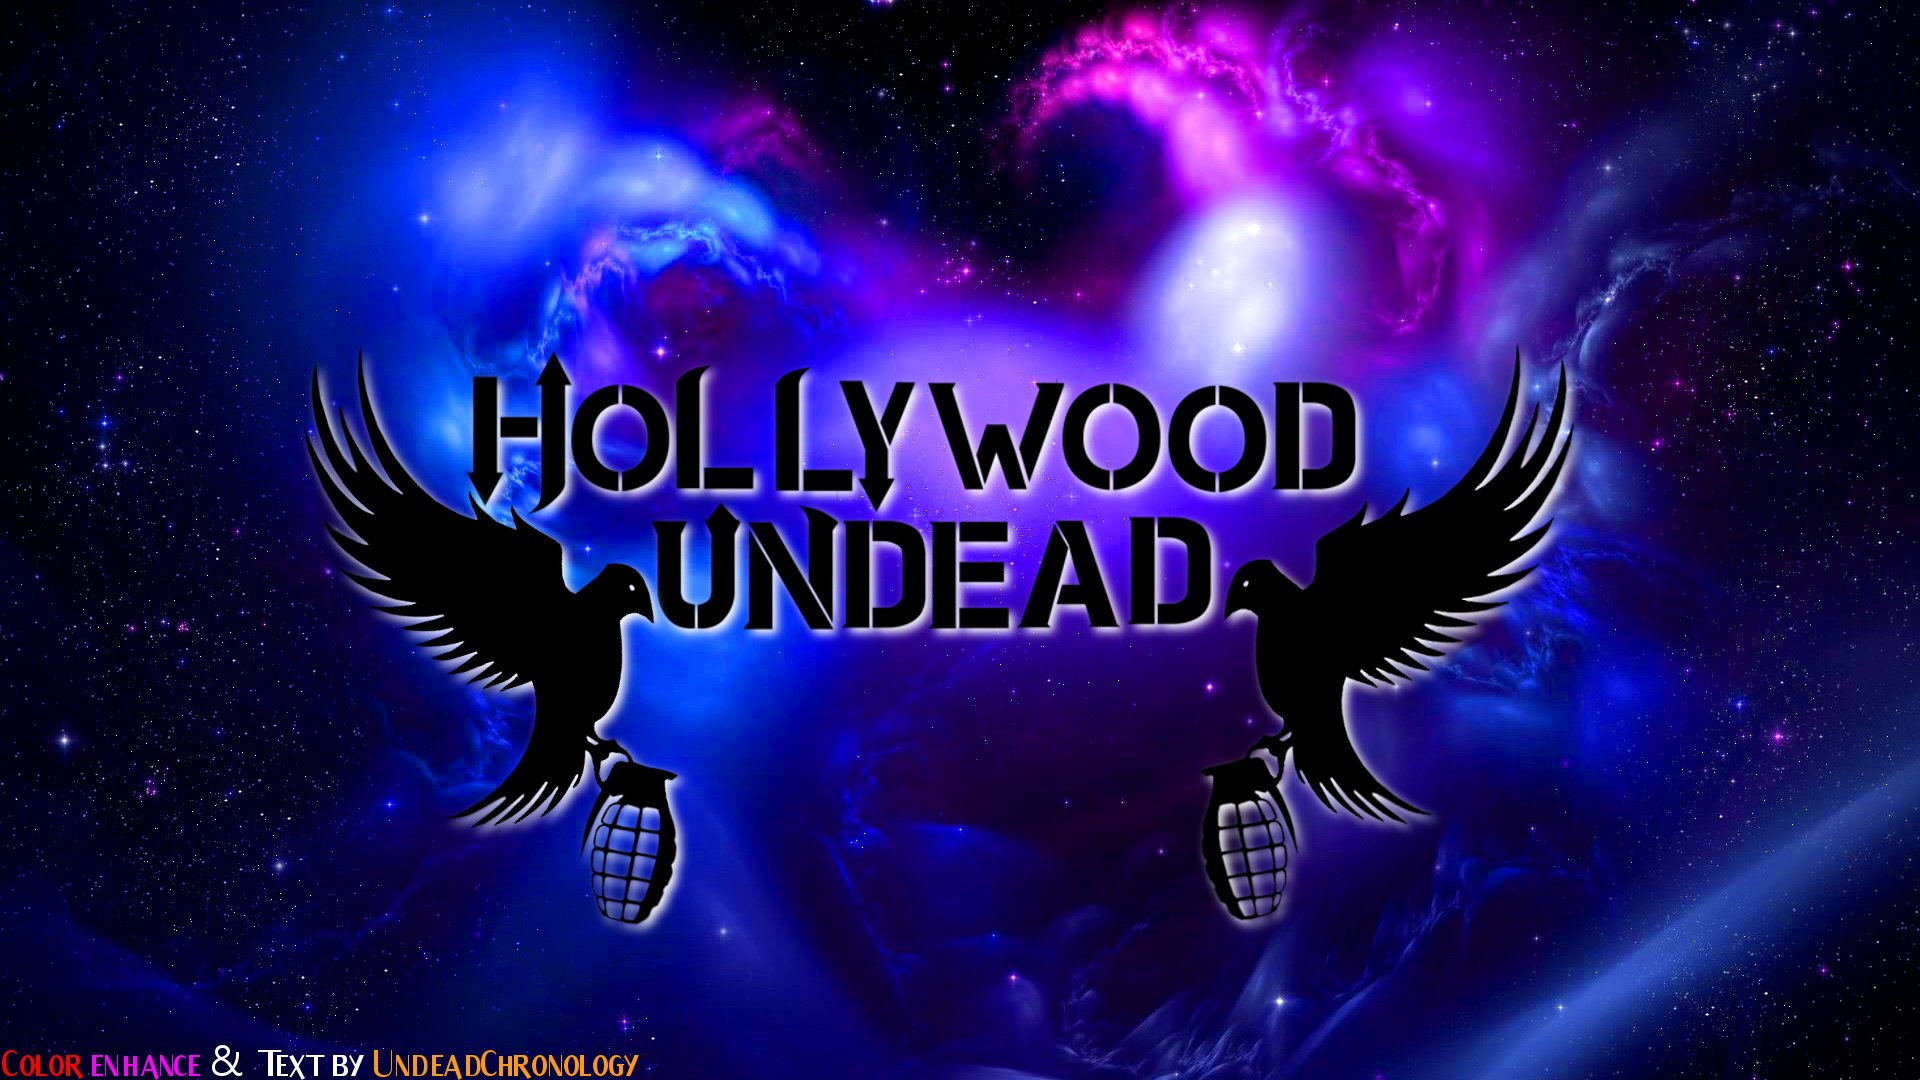 Hollywood Undead Wallpaper 1080p by DcfEmpx on